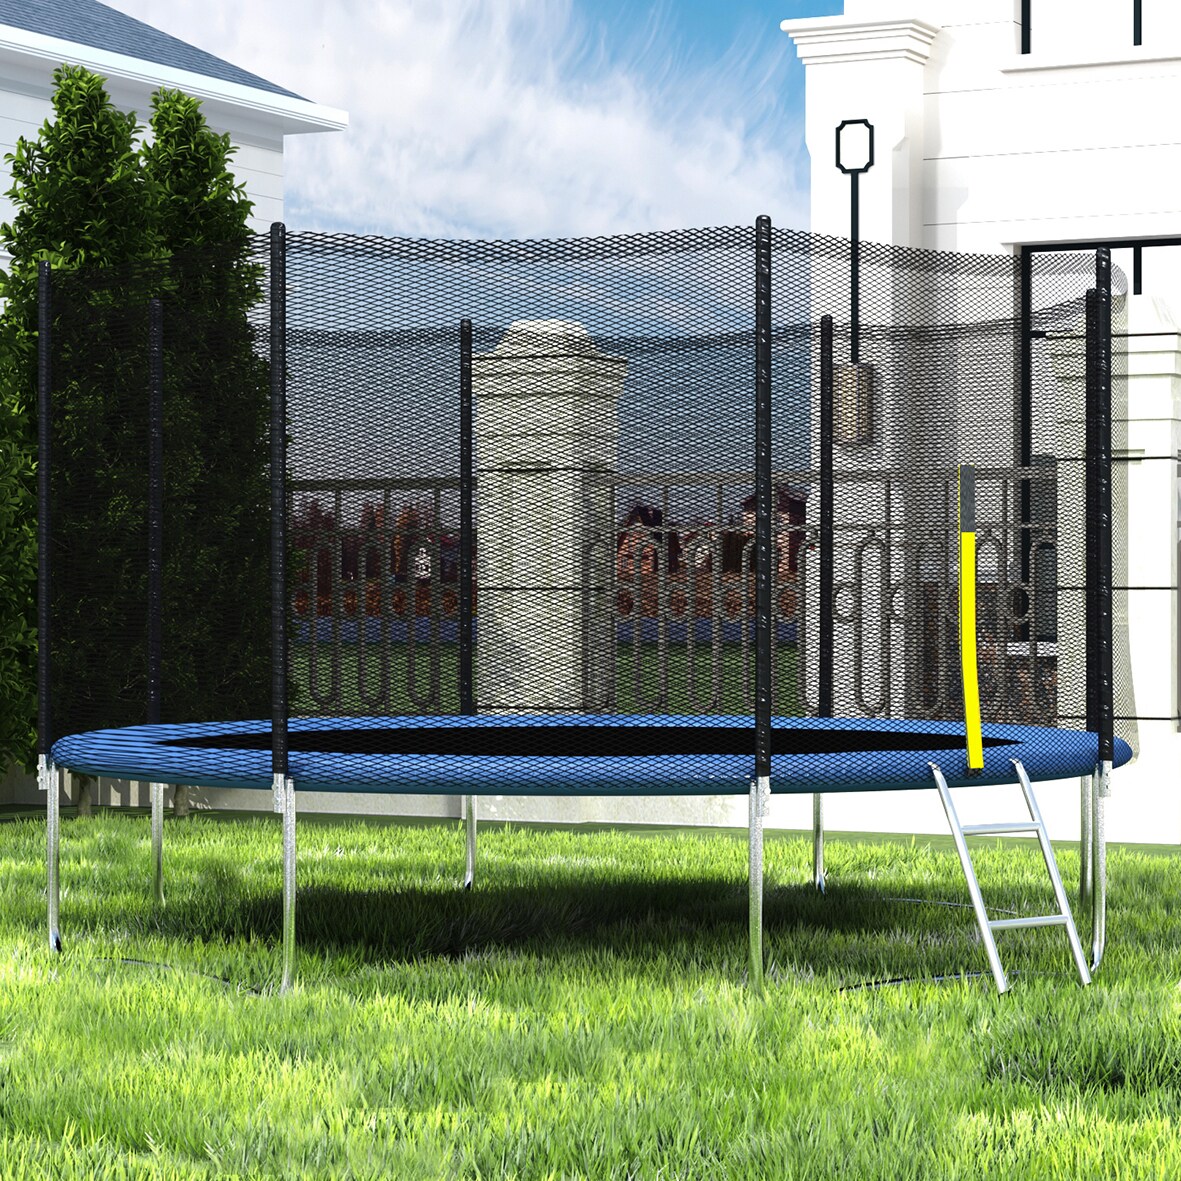 12ft Kids Trampoline with Safety Enclosure Net & Spring Pad,8-Foot Outdoor Round Bounce Jumper Indoor/Outdoor,Great Birthday Gift from US As Shown 